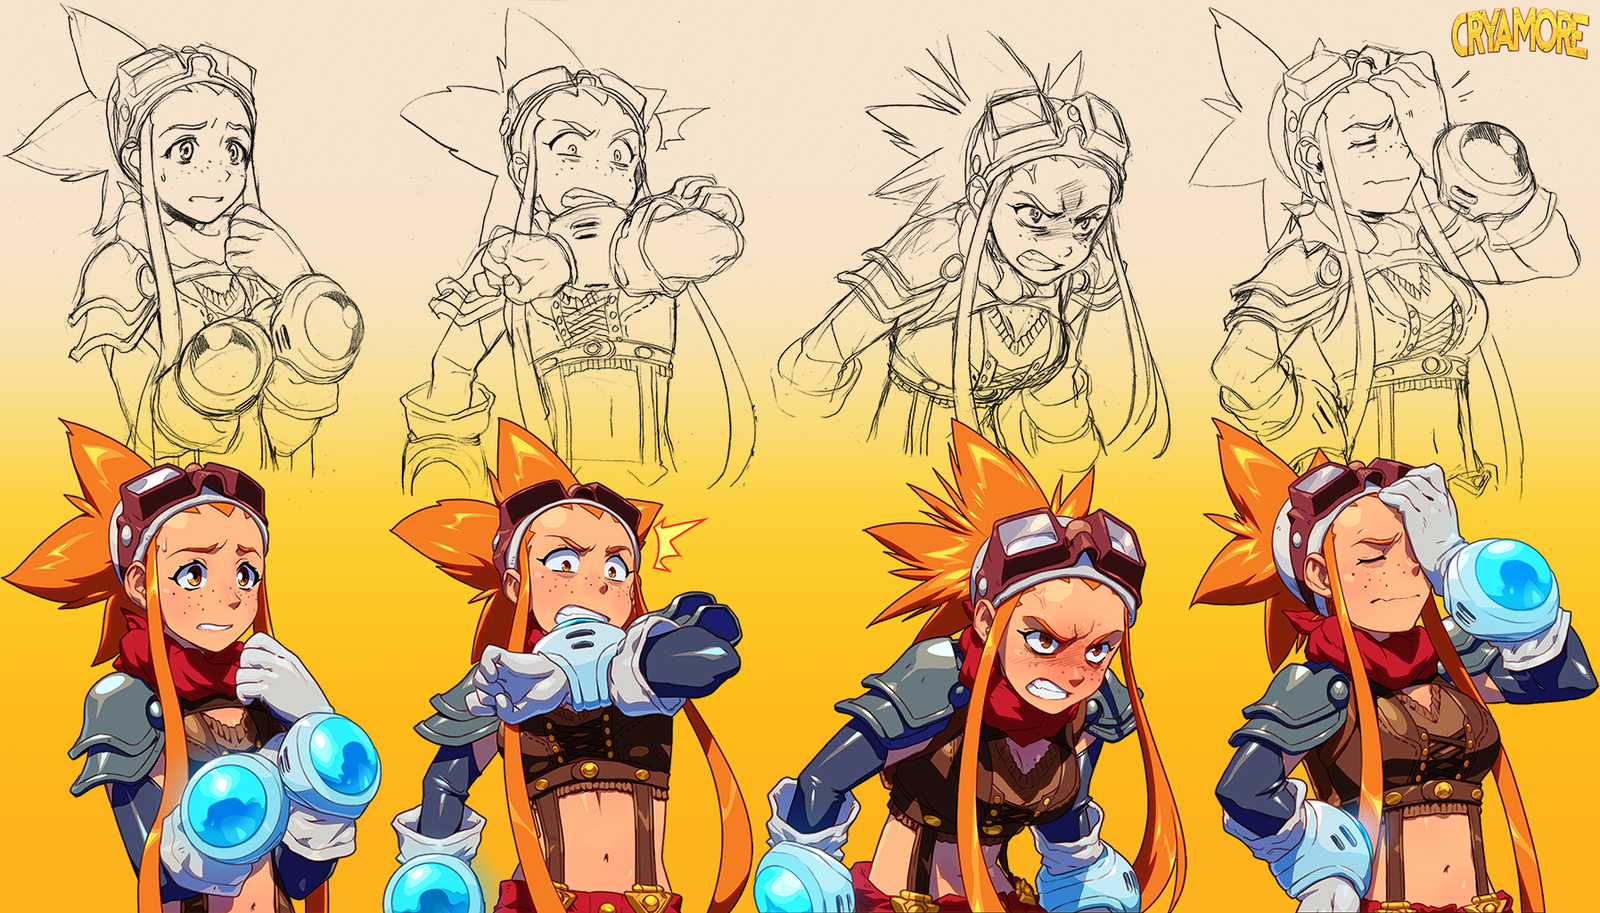 Atlus Announces “Cryamore” For 2016